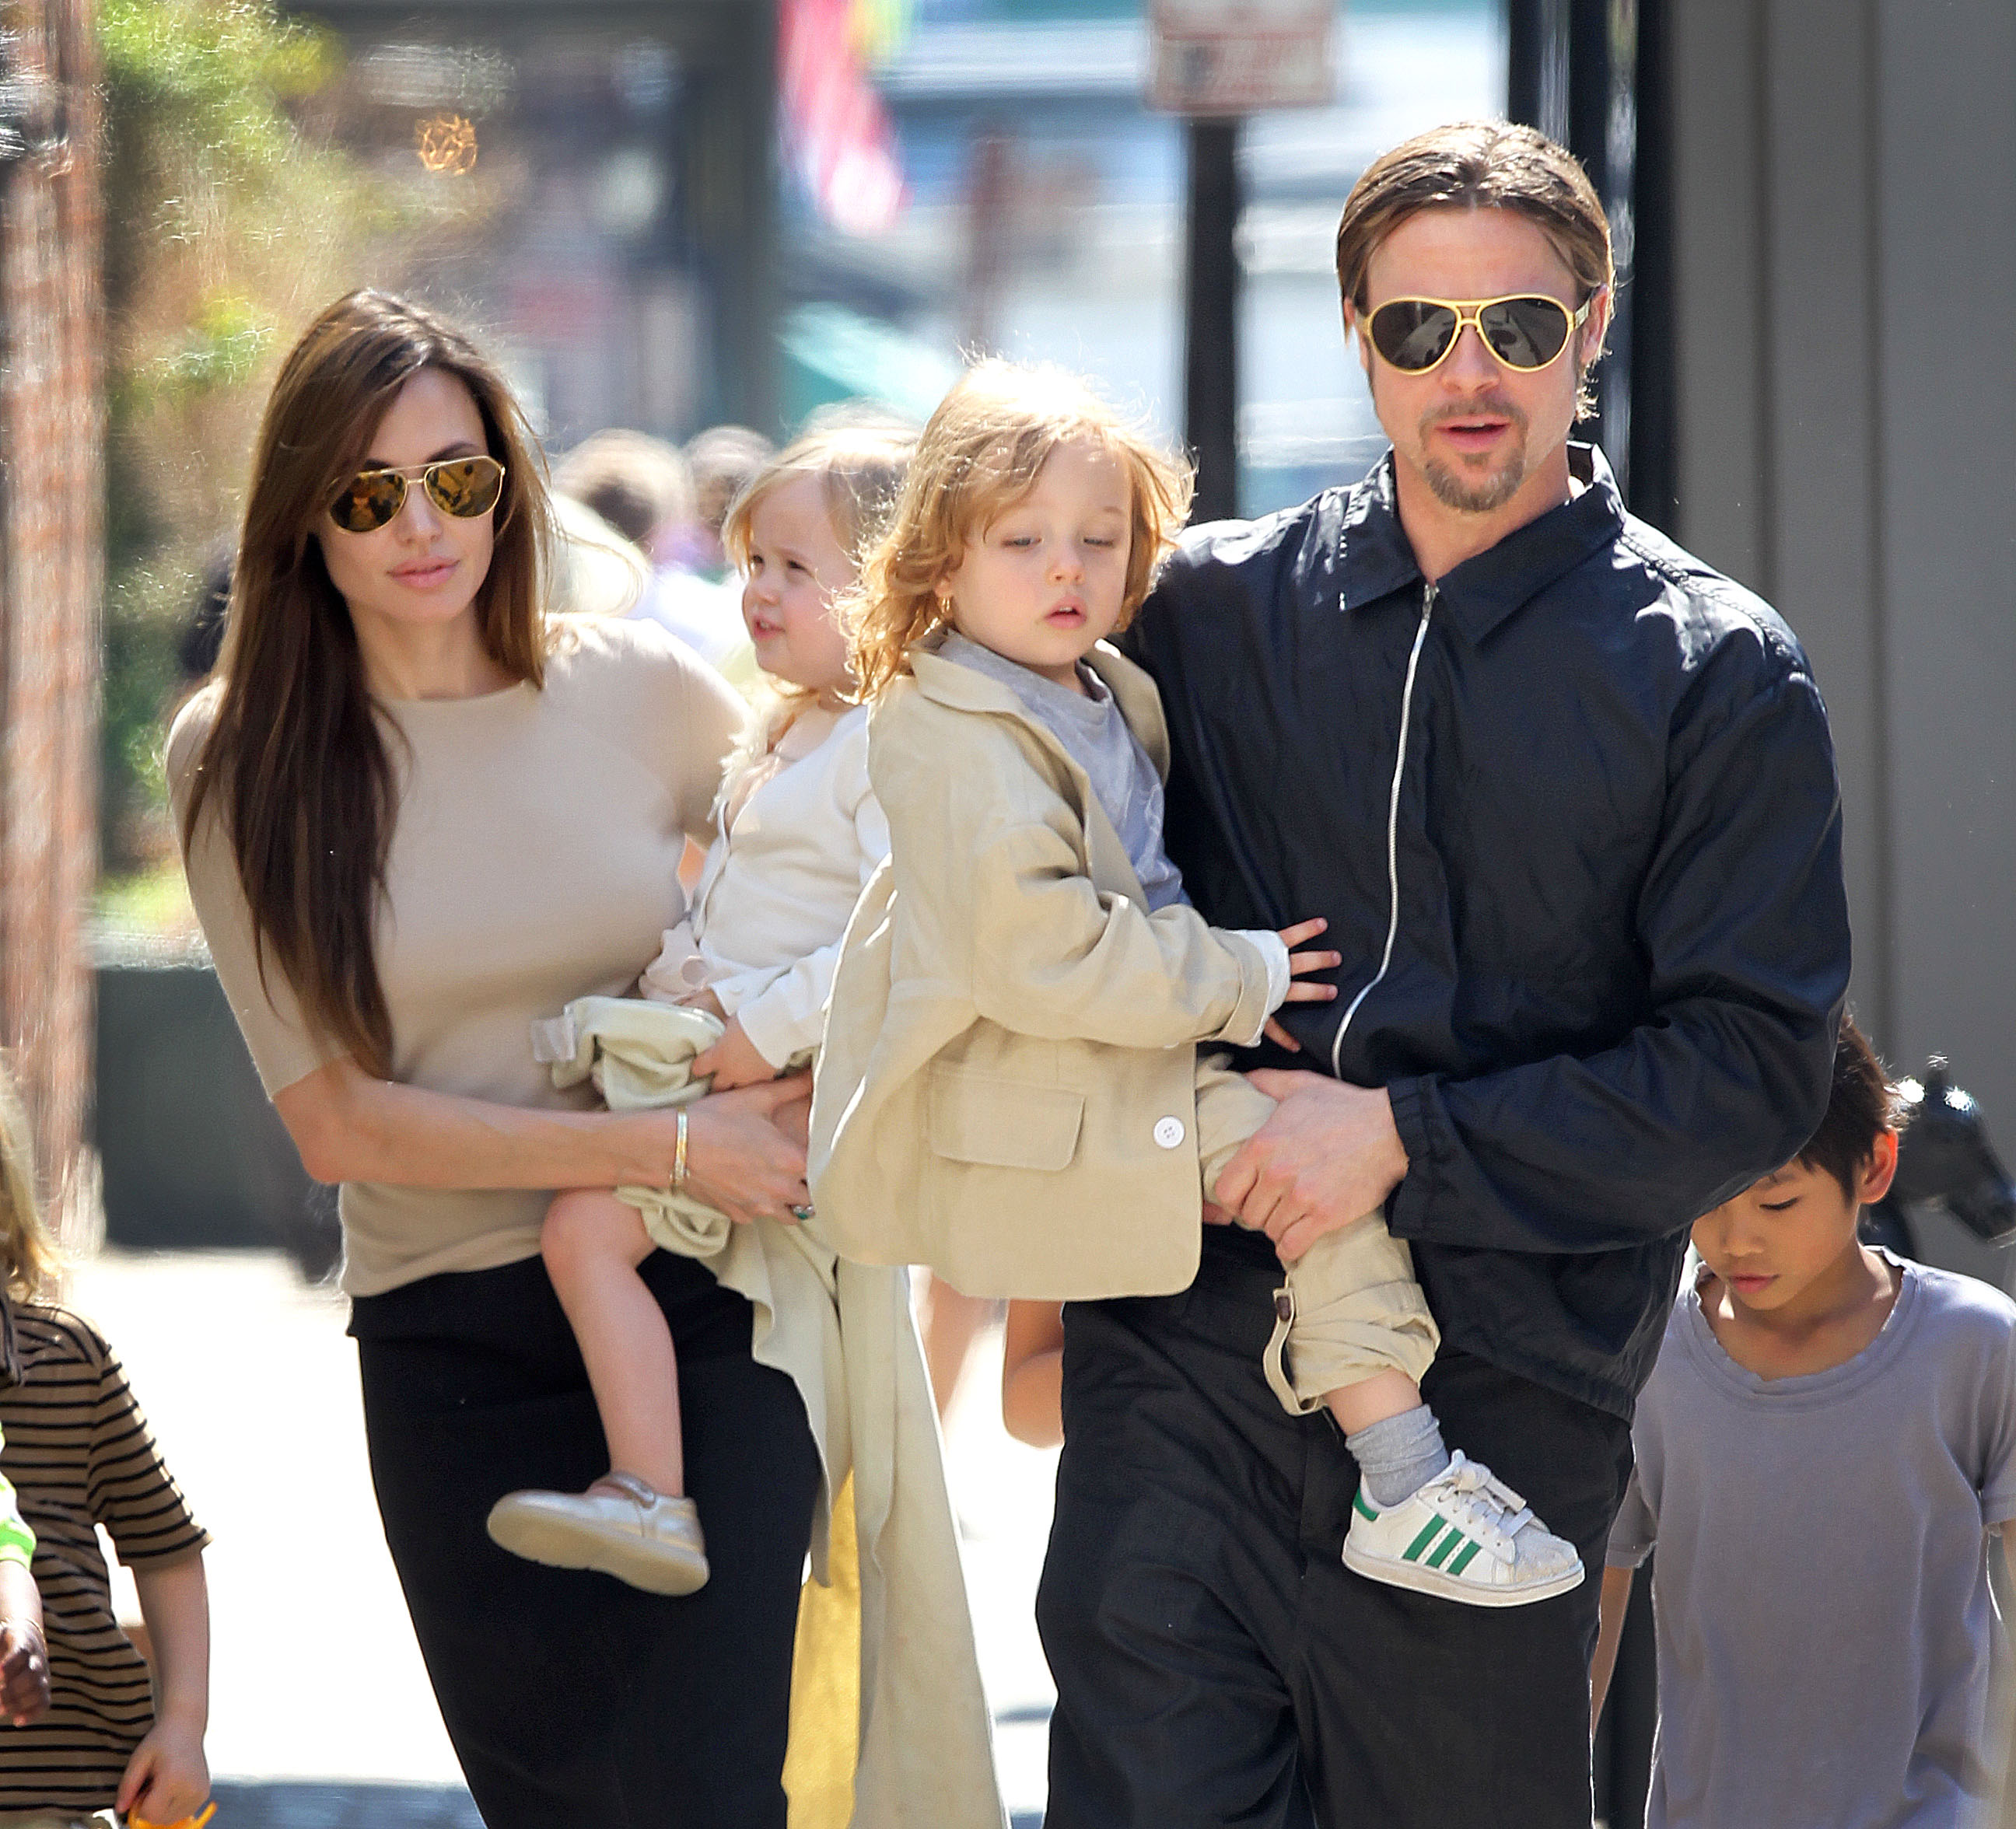 Brad Pitt and Angelina Jolie take their family for a walk in New Orleans